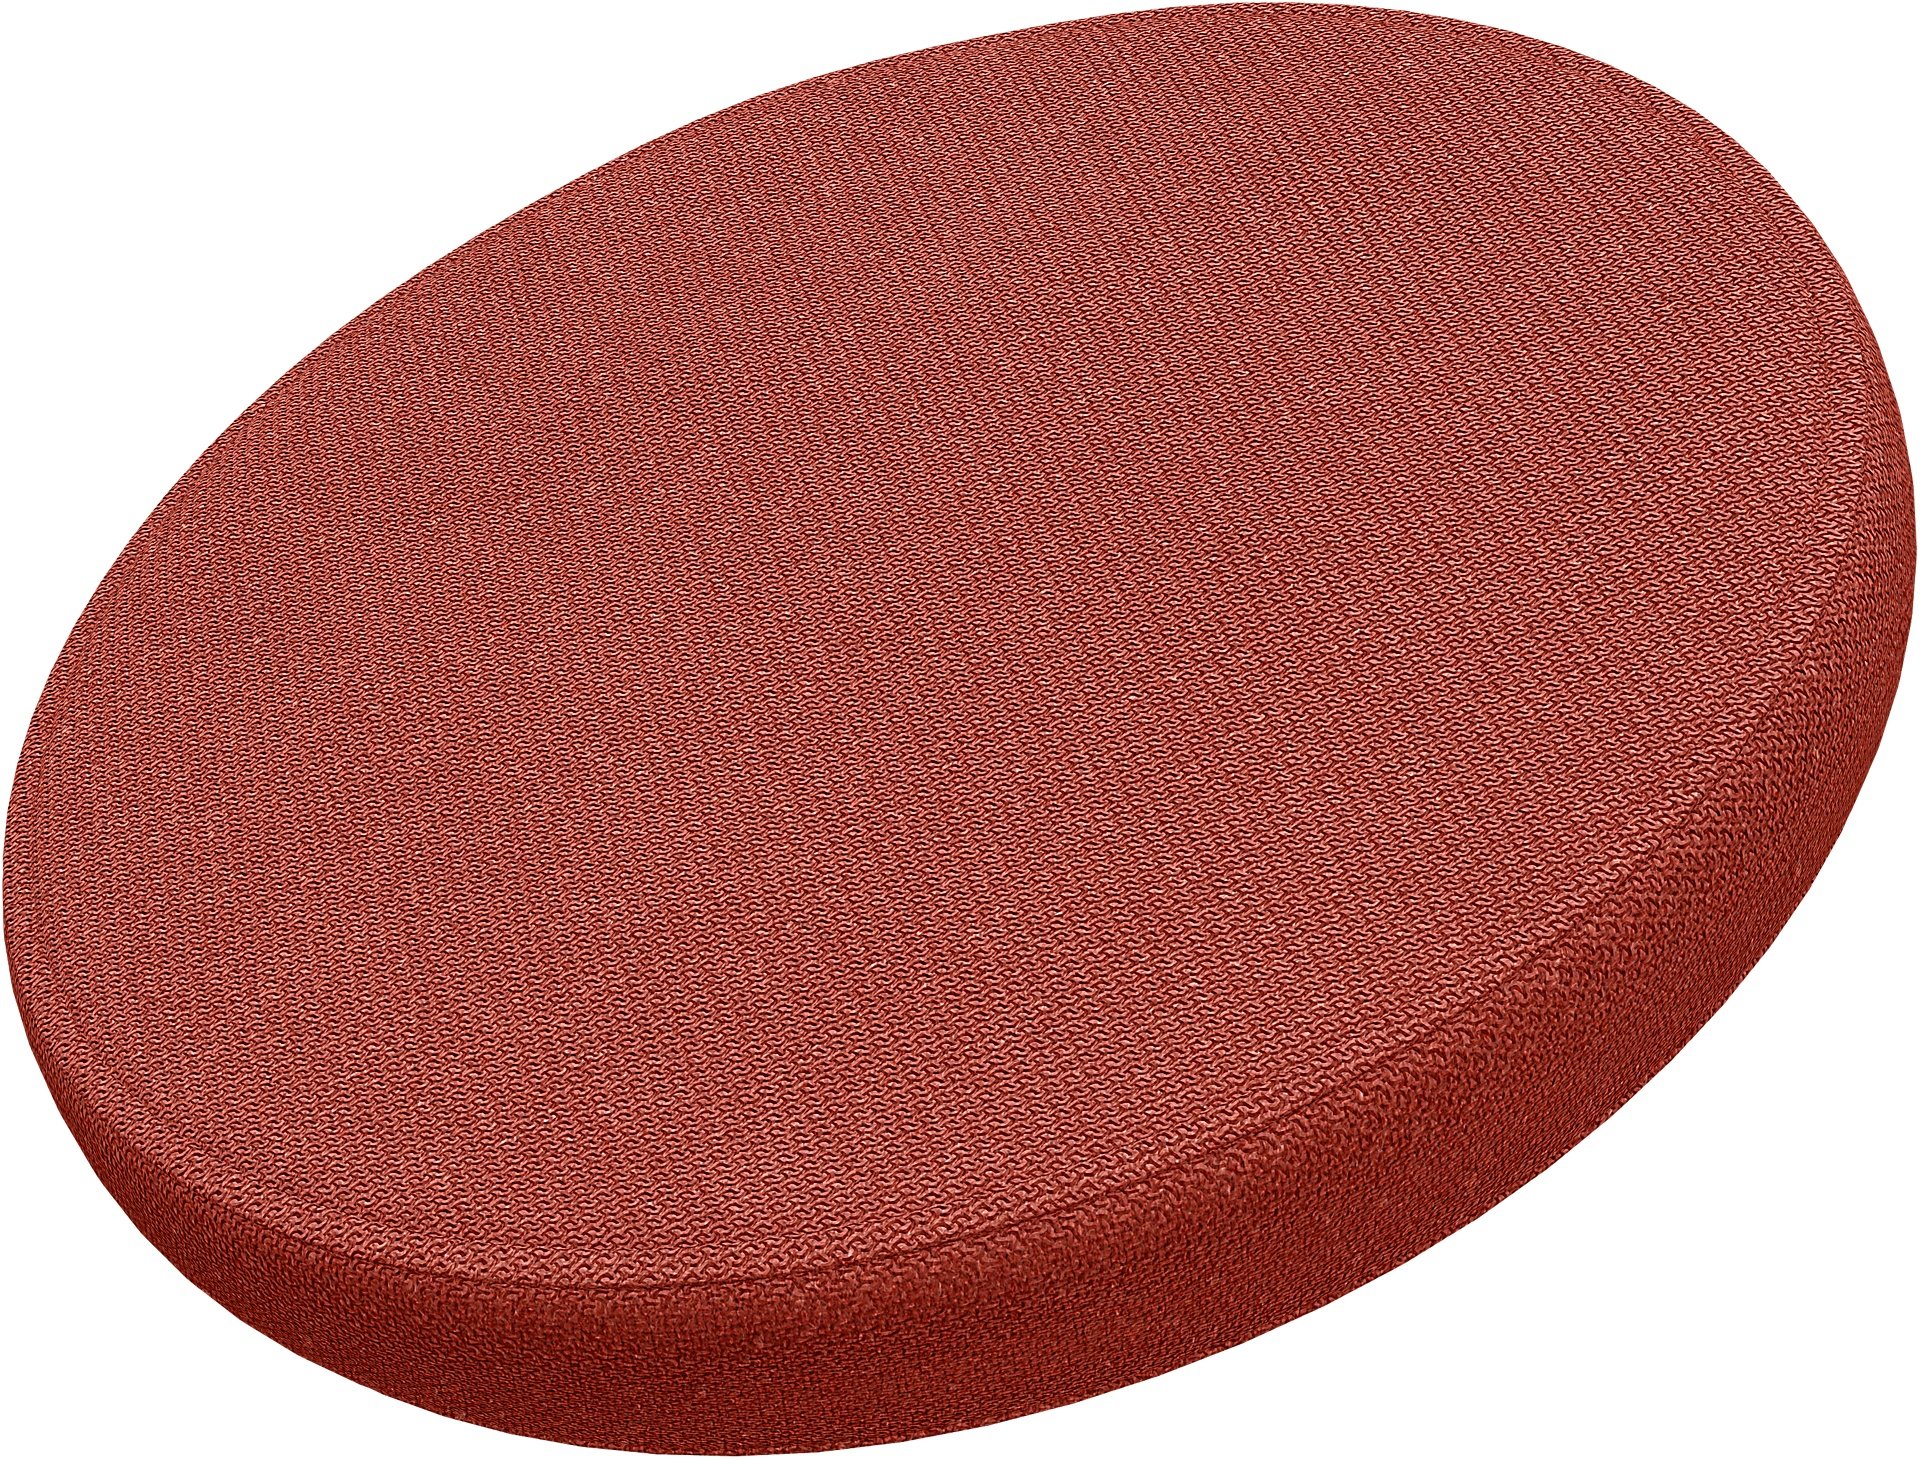 IKEA - Froson/Duvholmen Chair Seat Cushion Round Cover , Coral Red, Outdoor - Bemz